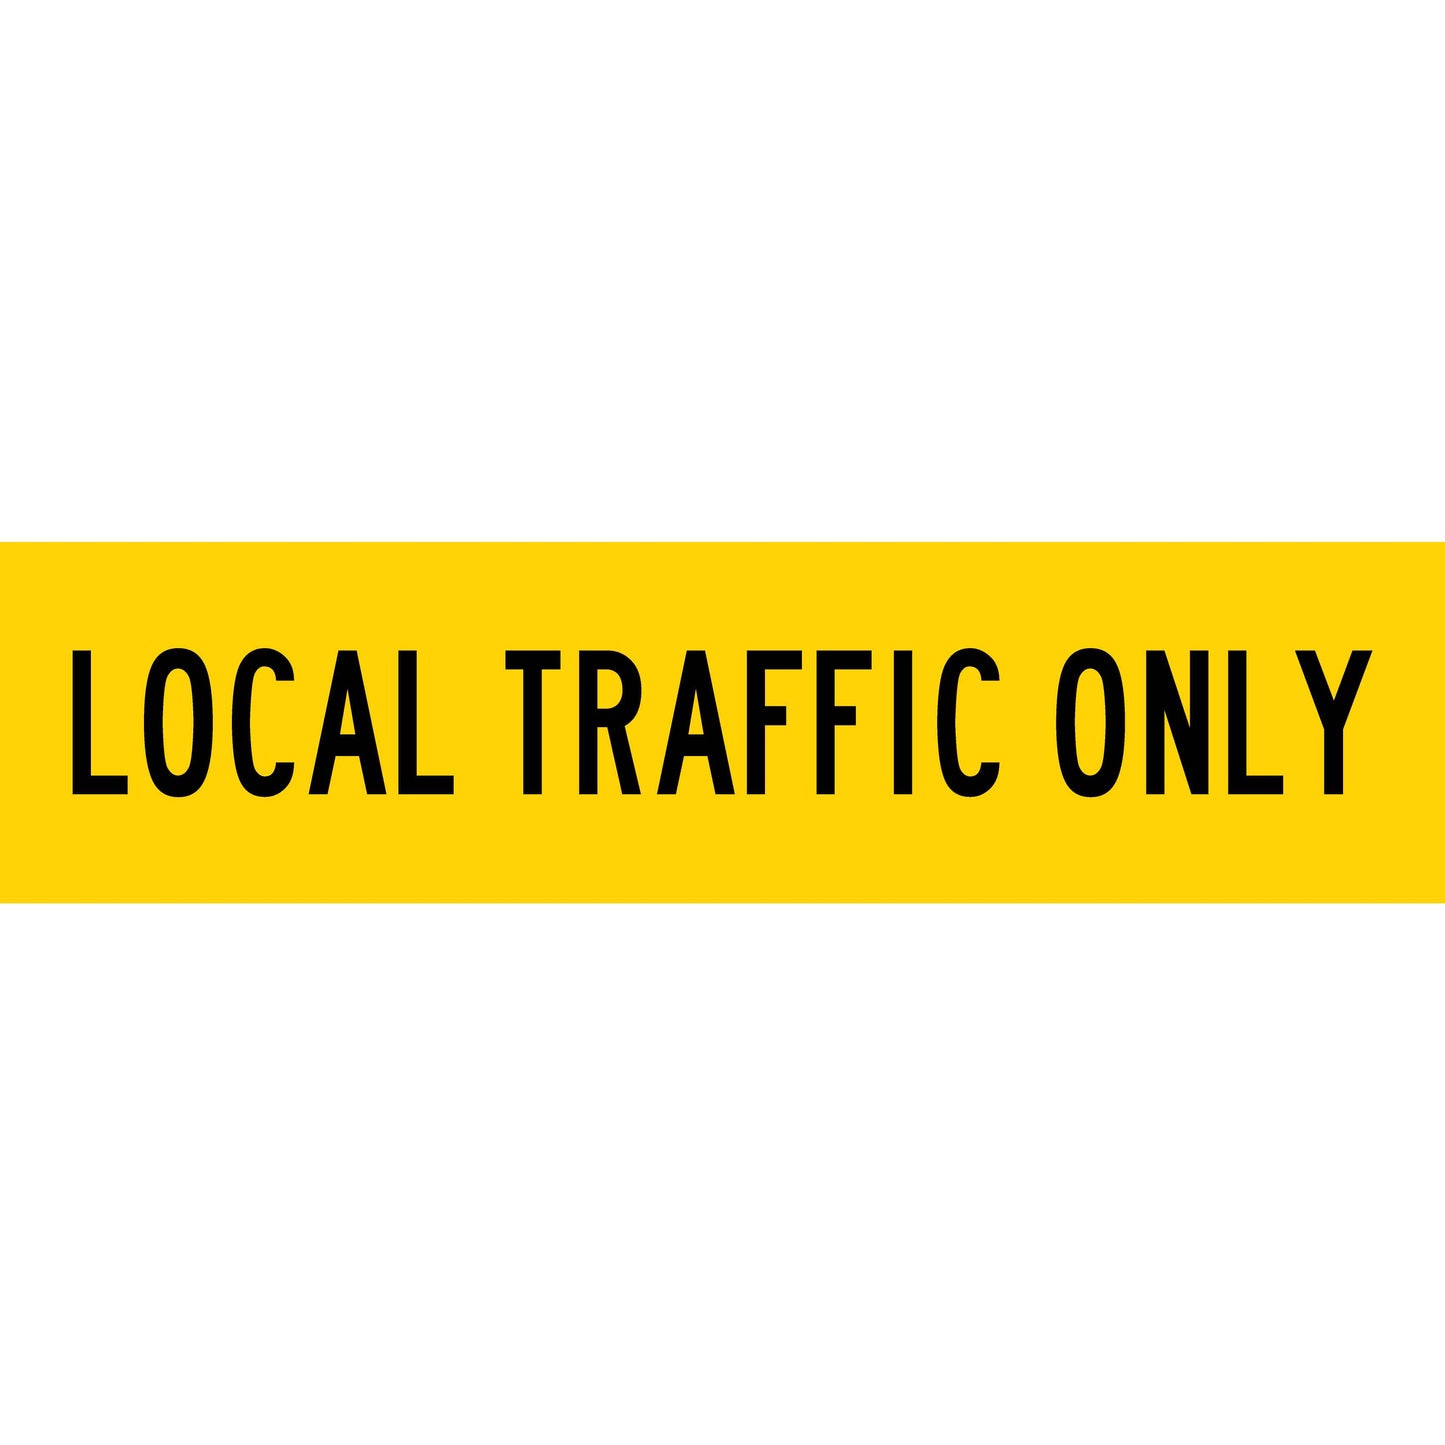 Local Traffic Only Long Skinny Multi Message Reflective Traffic Sign